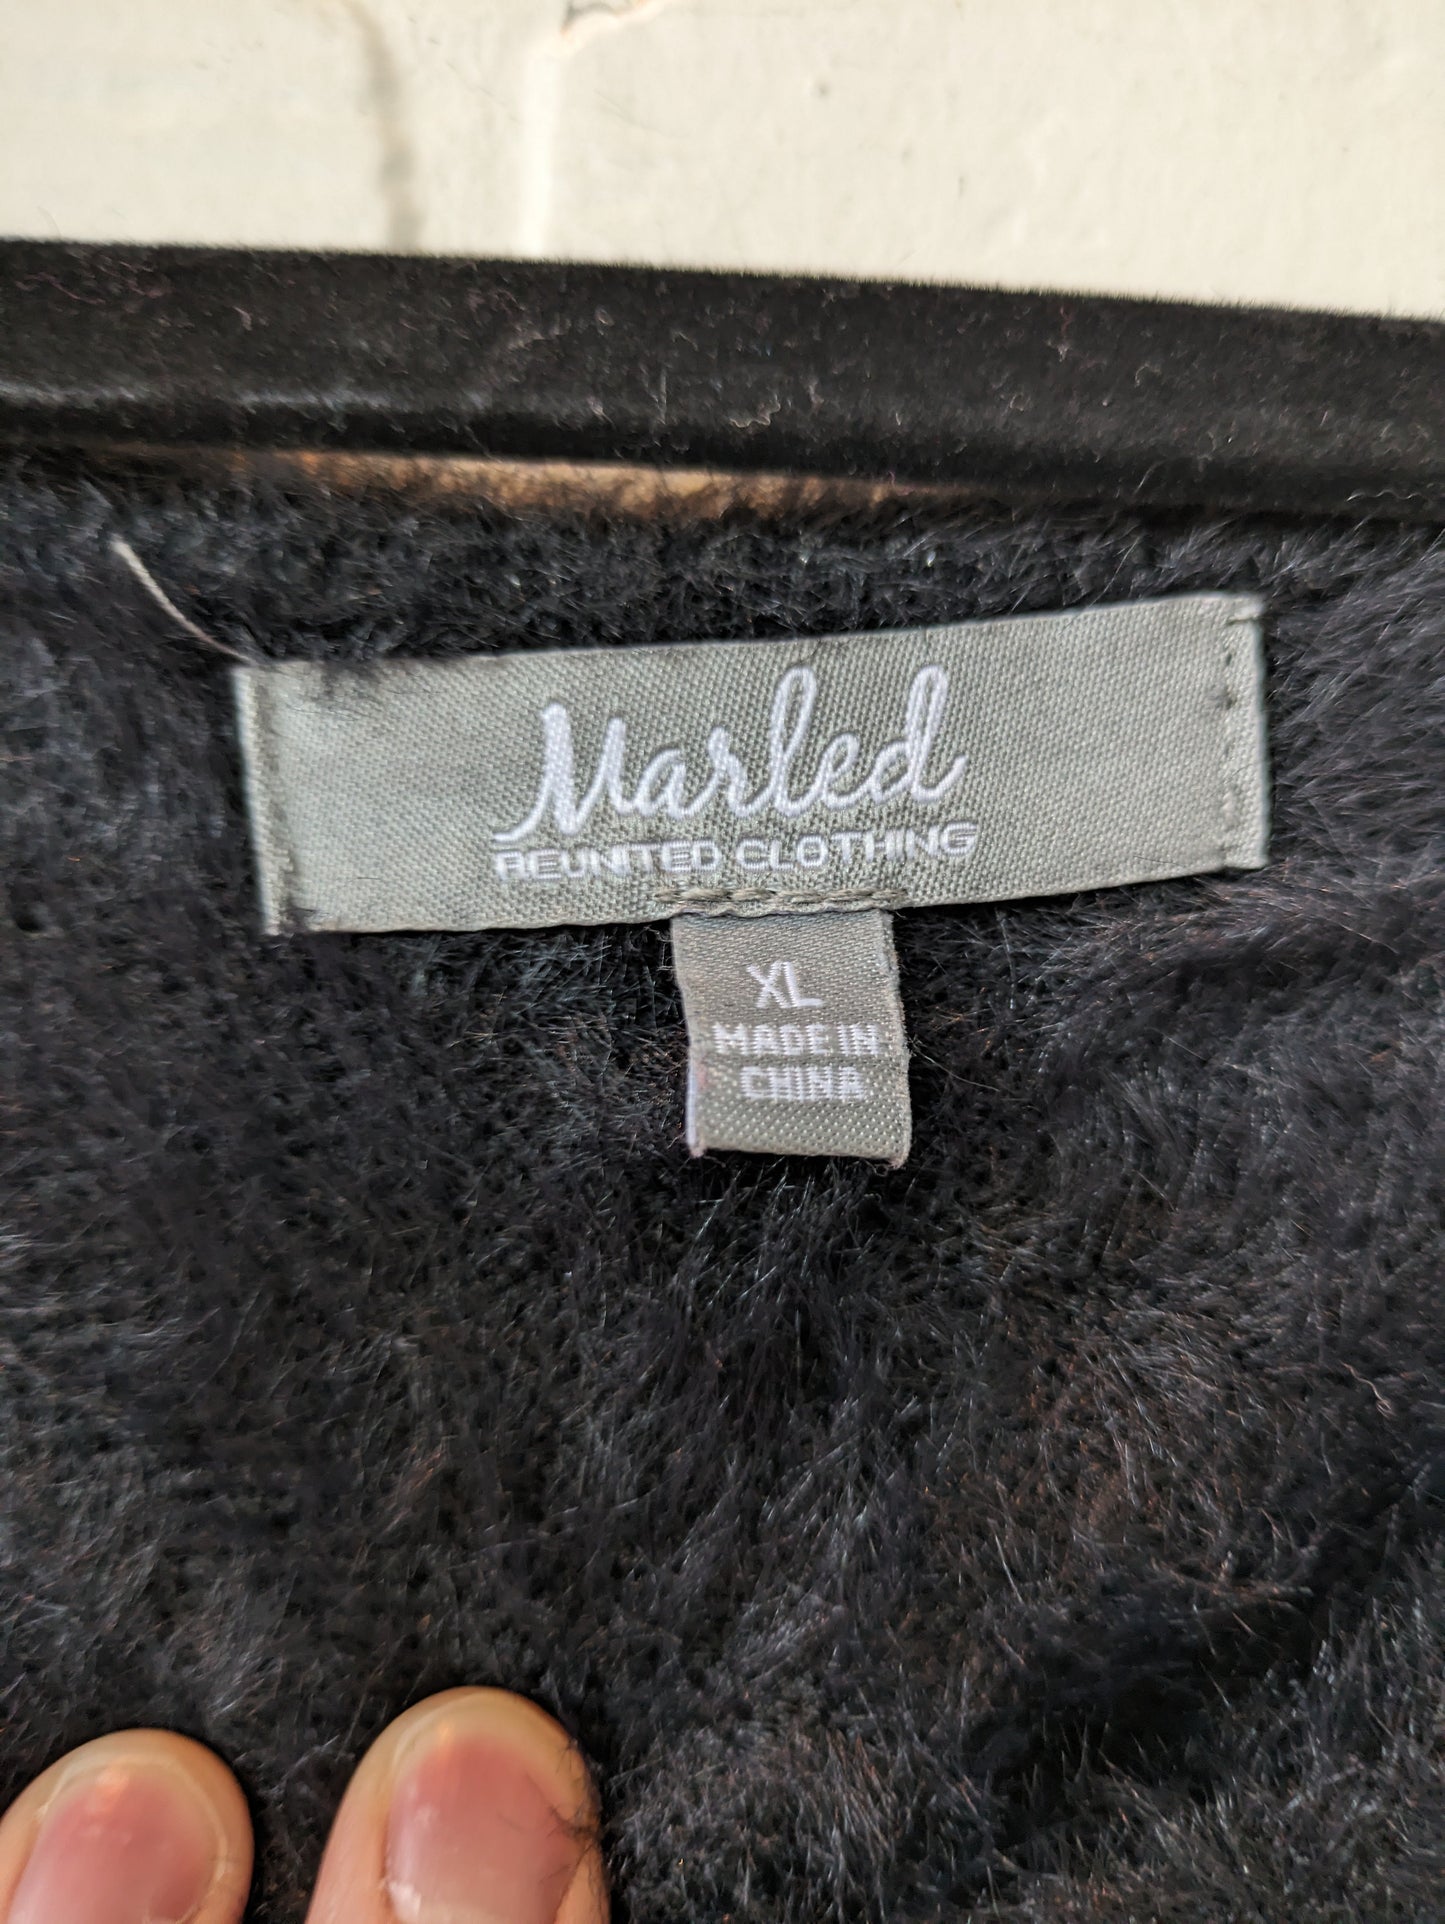 Sweater By Marled  Size: Xl